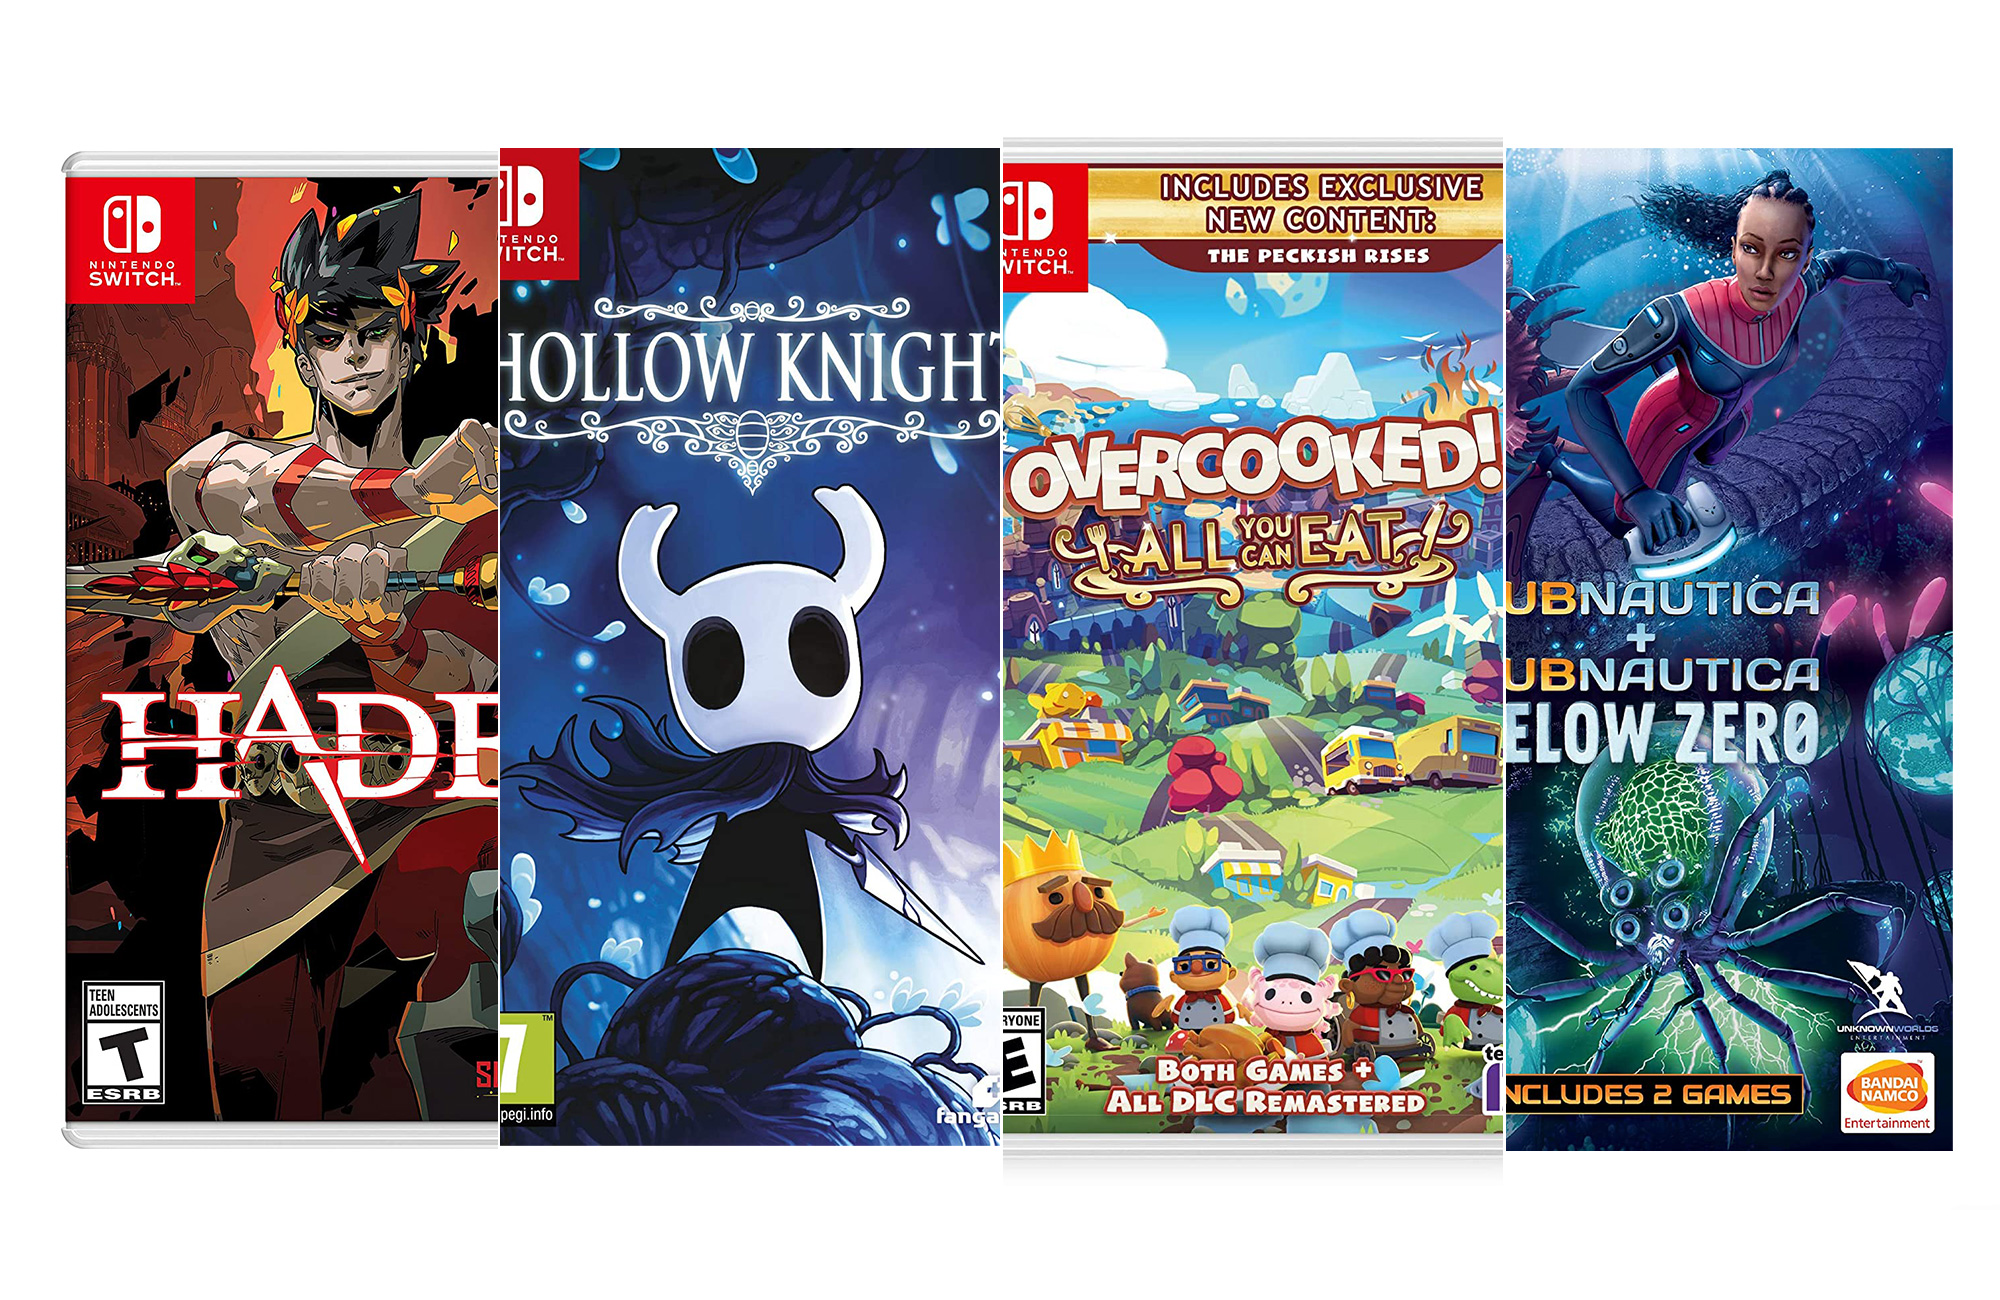 Top 25 Nintendo Switch Indie Games of All Time